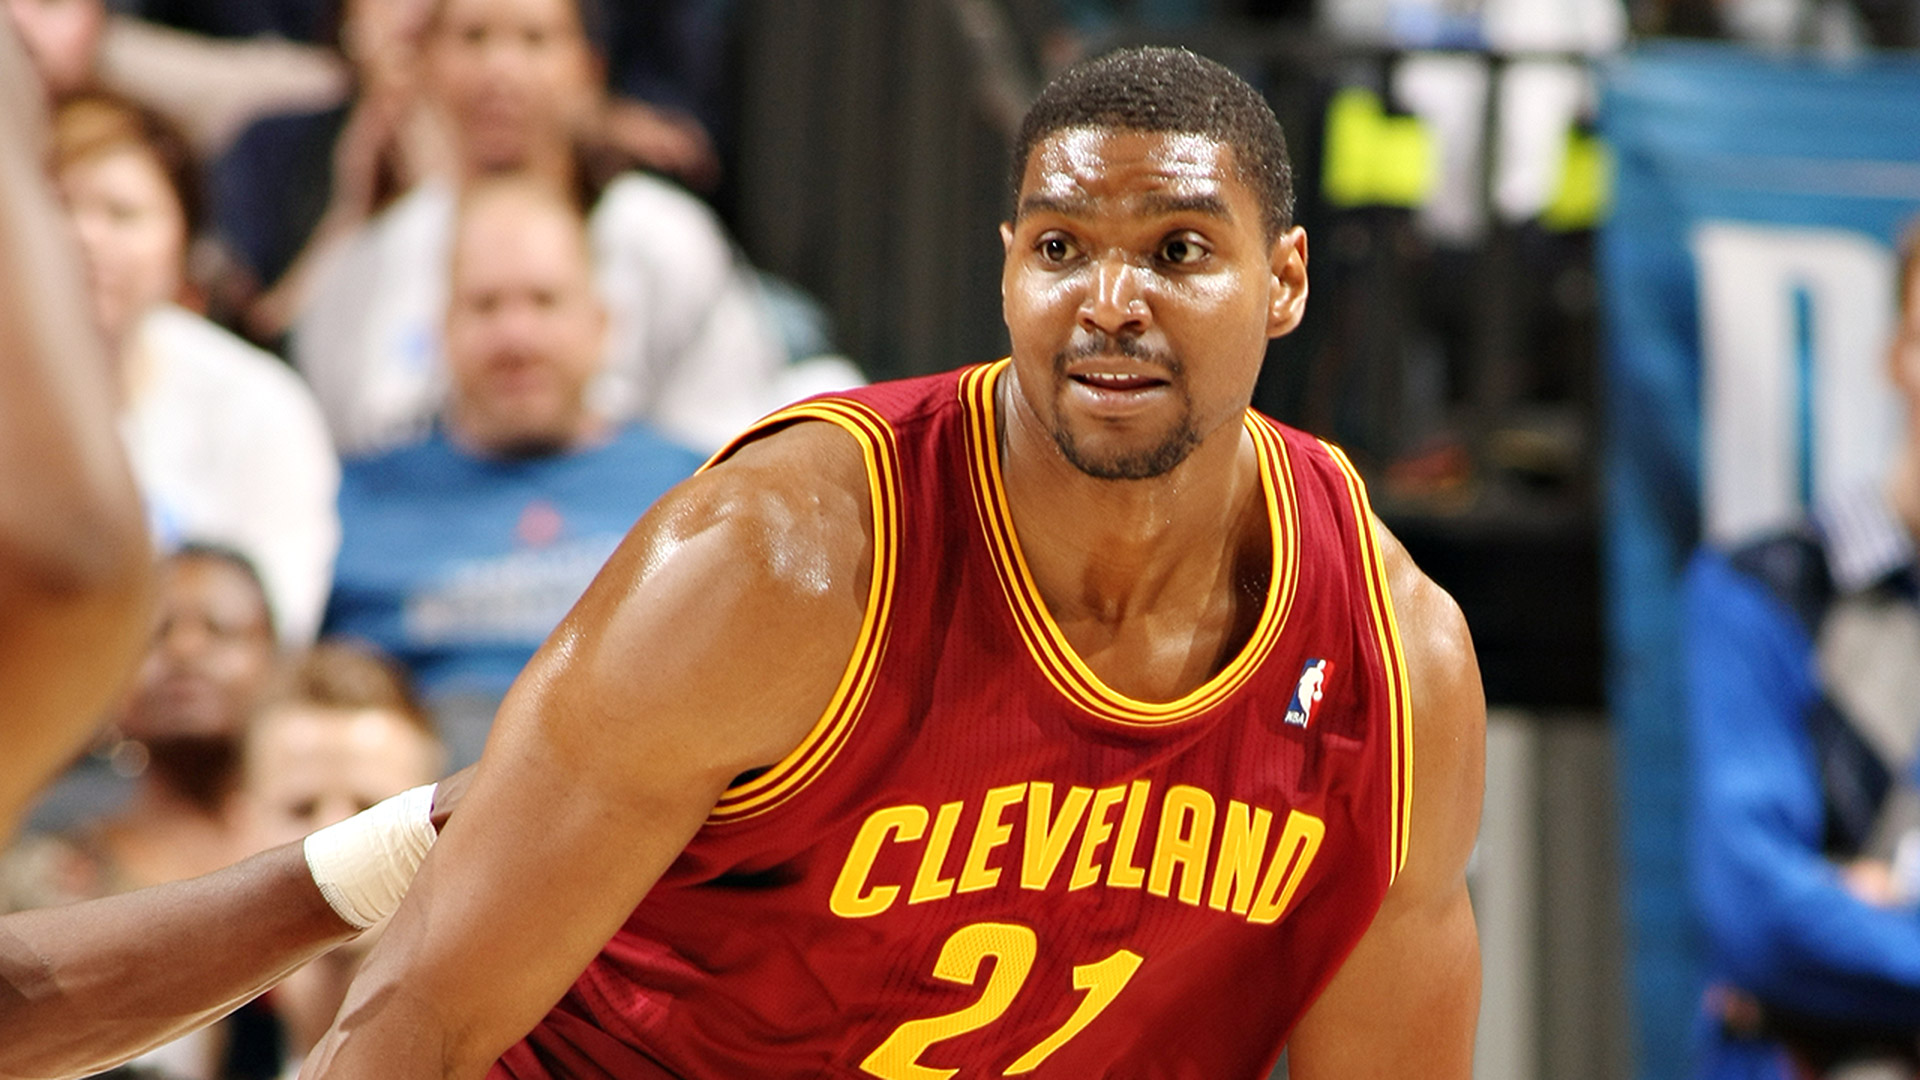 Cavaliers trade Andrew Bynum and draft picks to the Bulls for Luol